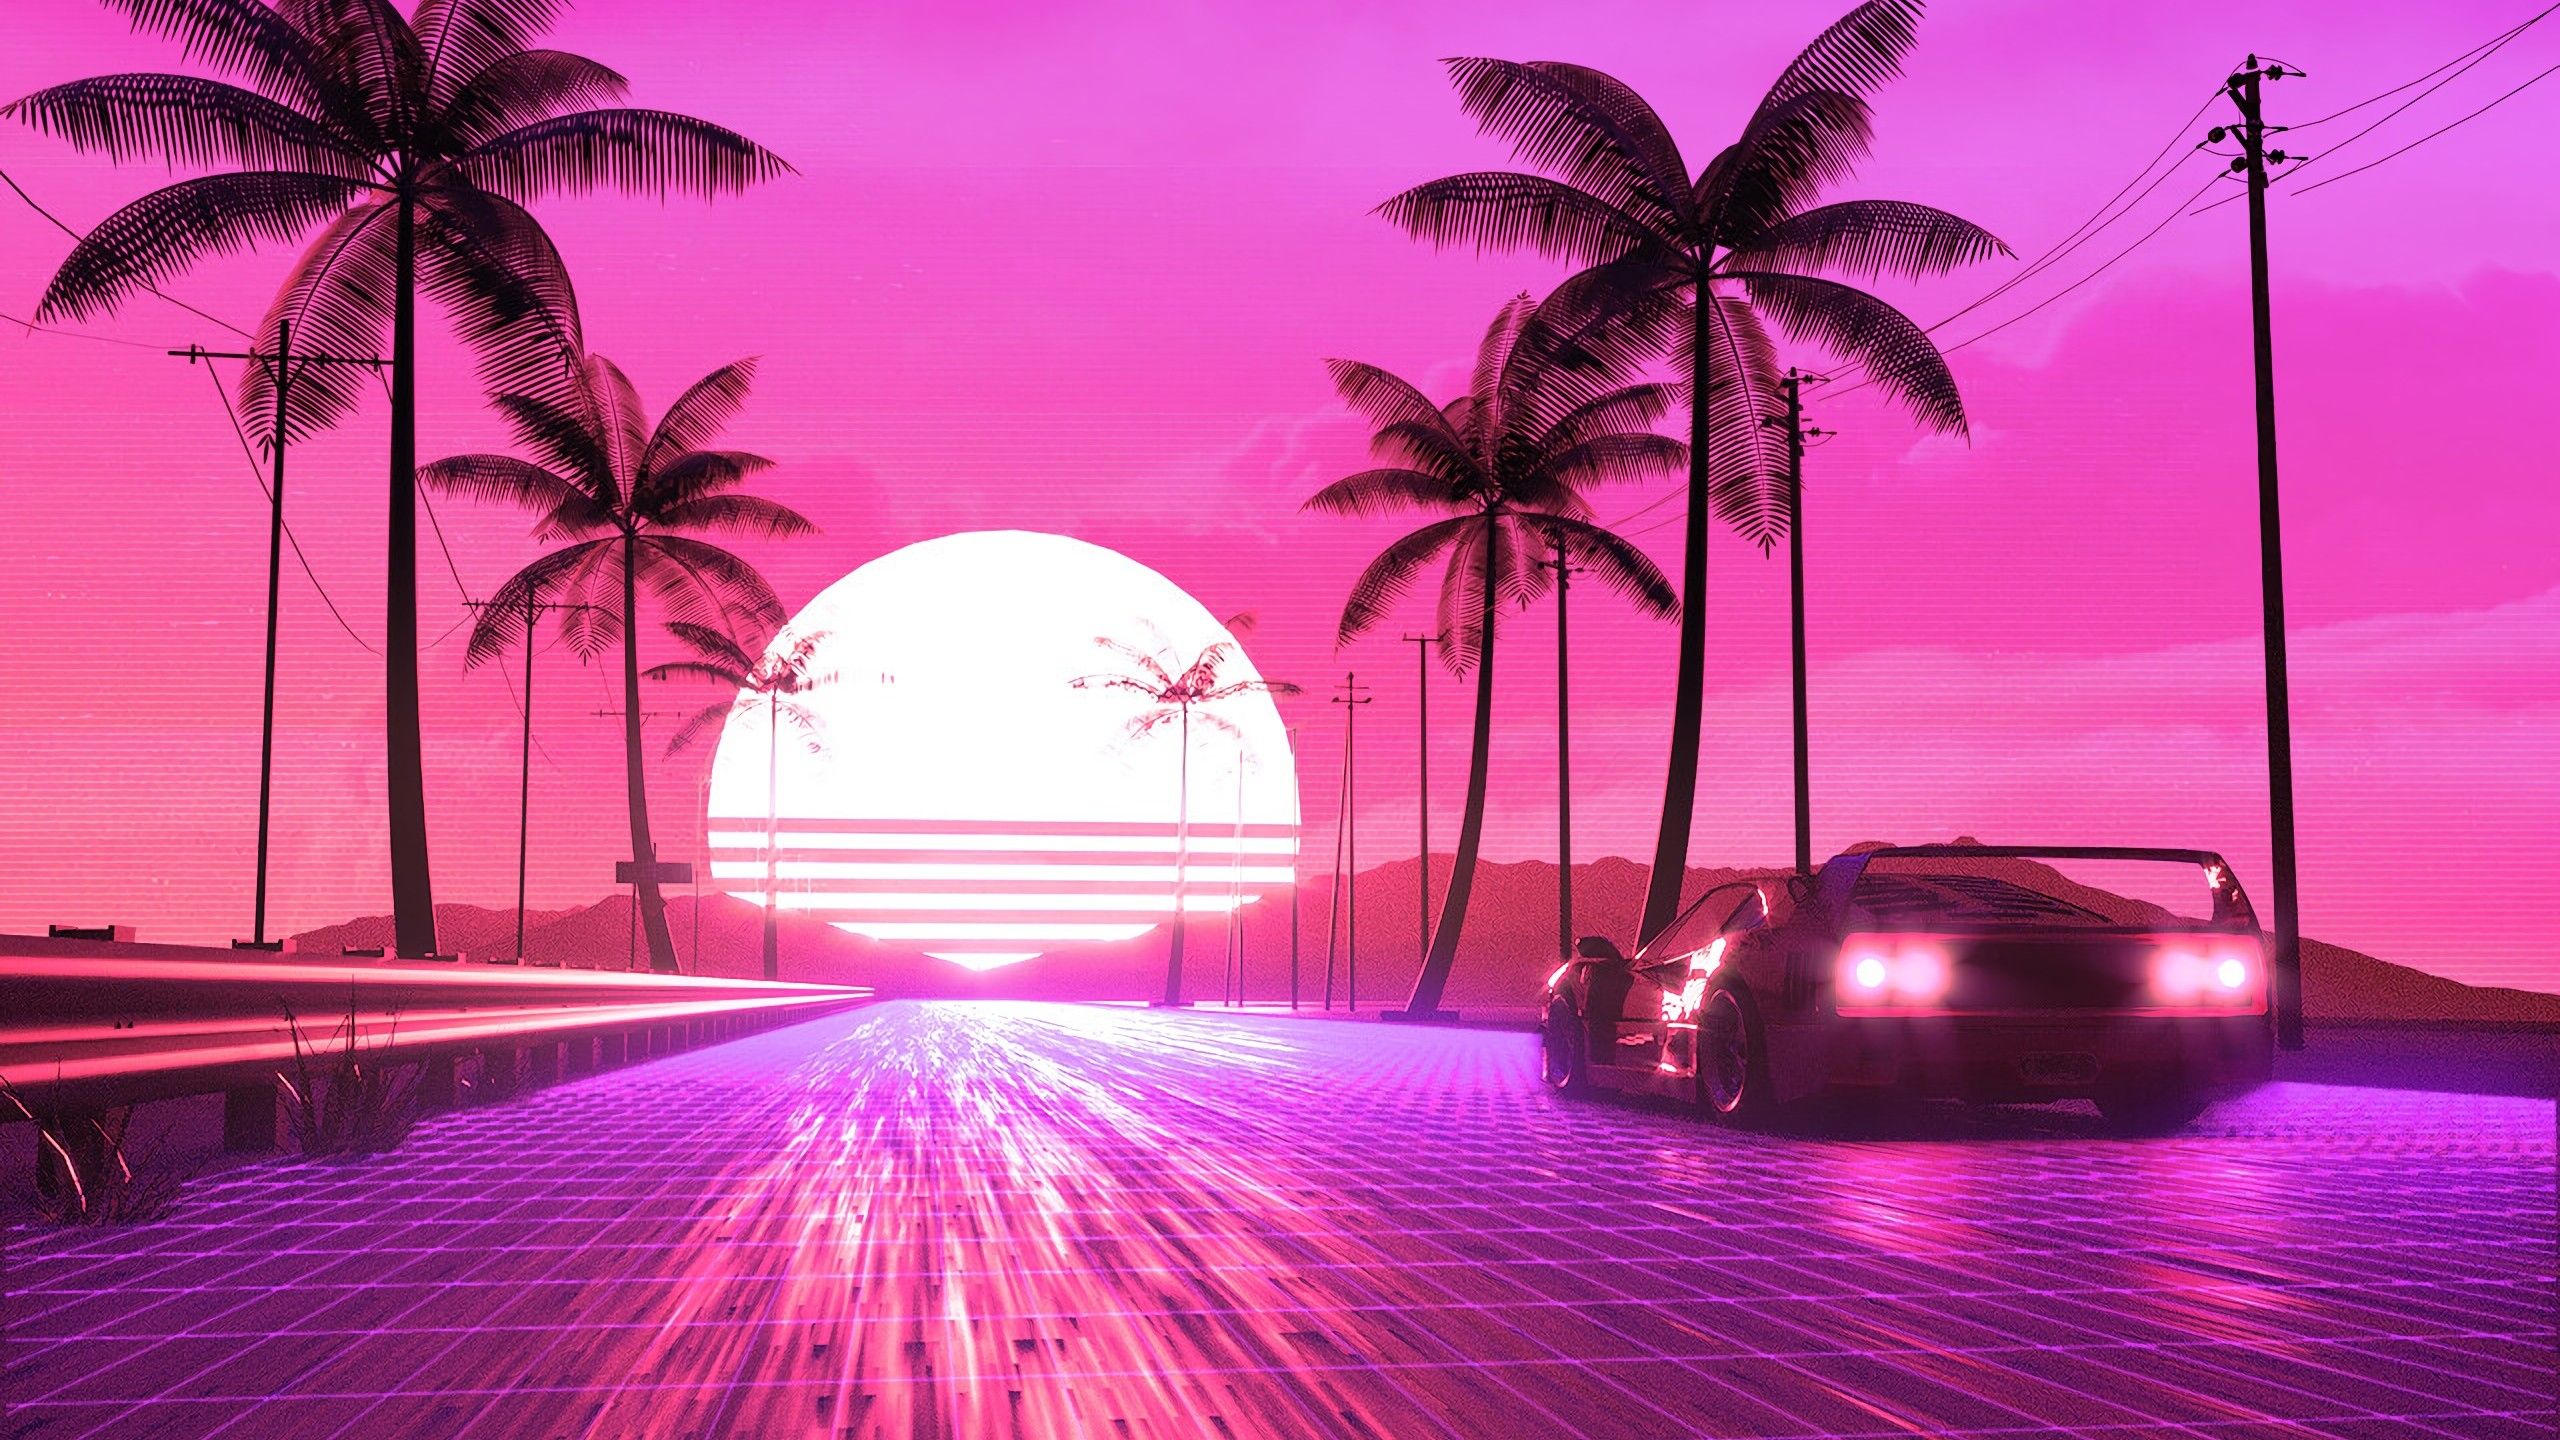 80s Themed Background Images, HD Pictures and Wallpaper For Free Download